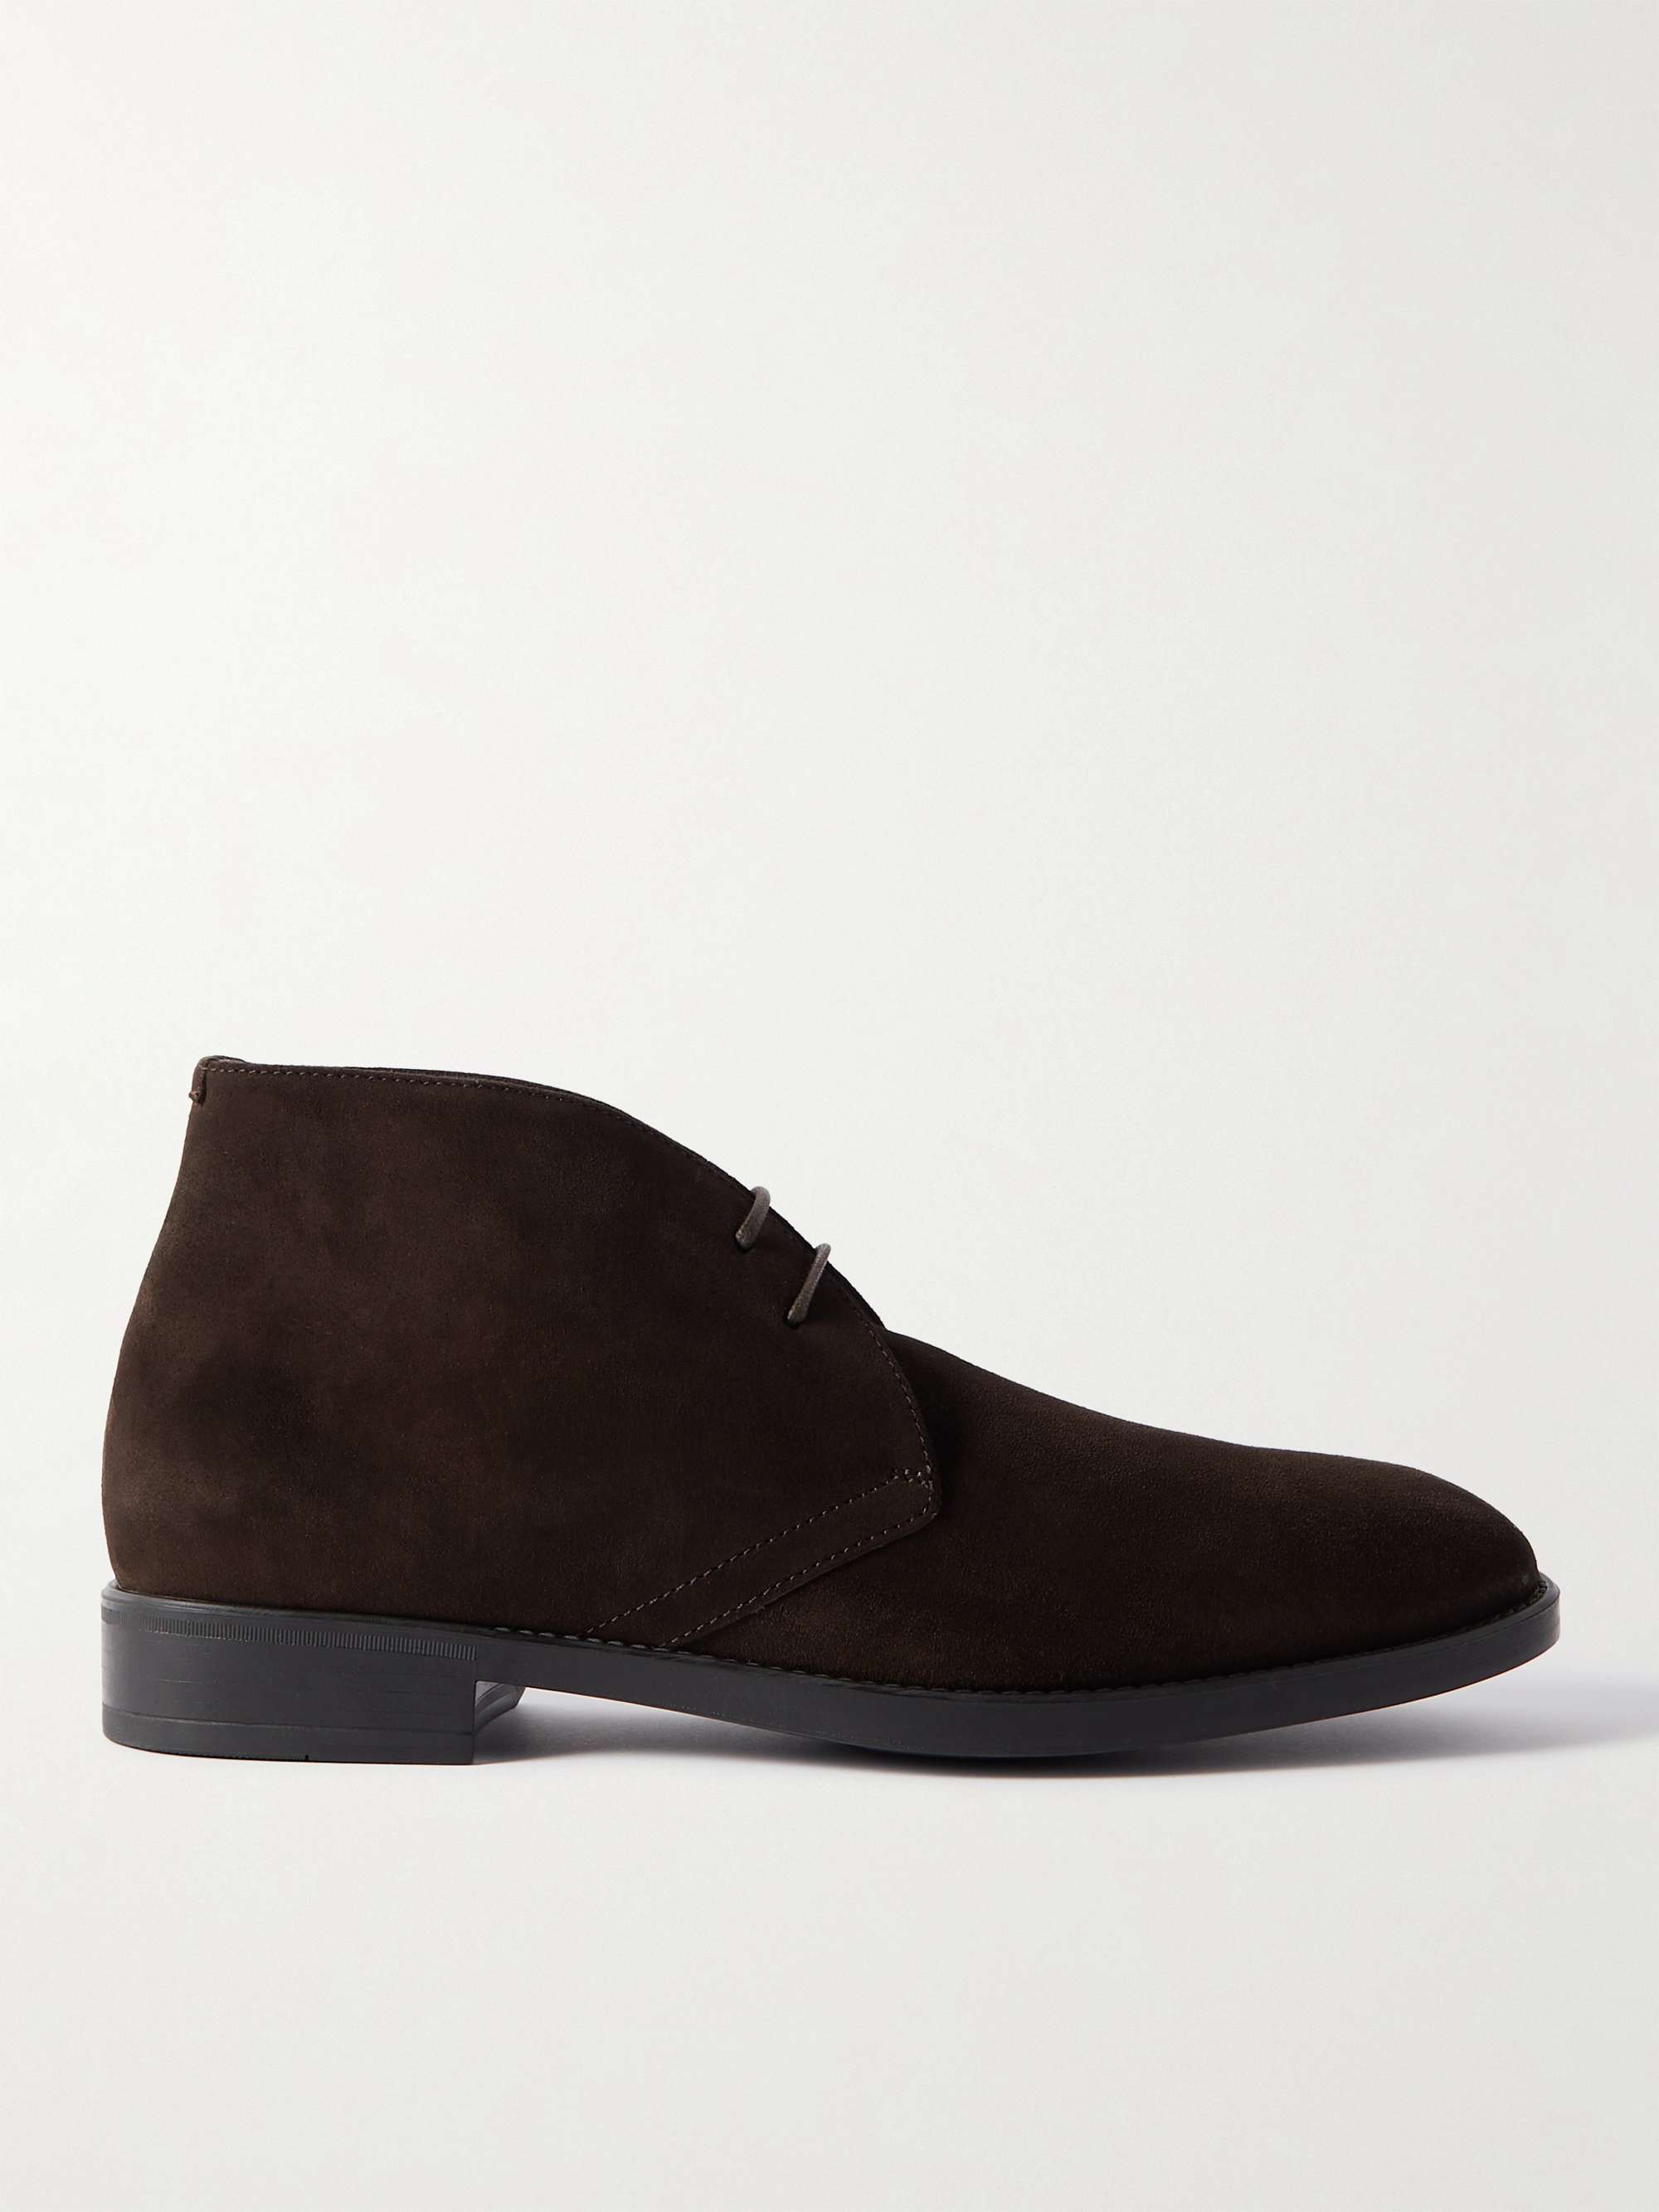 TOM FORD Robert Suede Chukka Boots